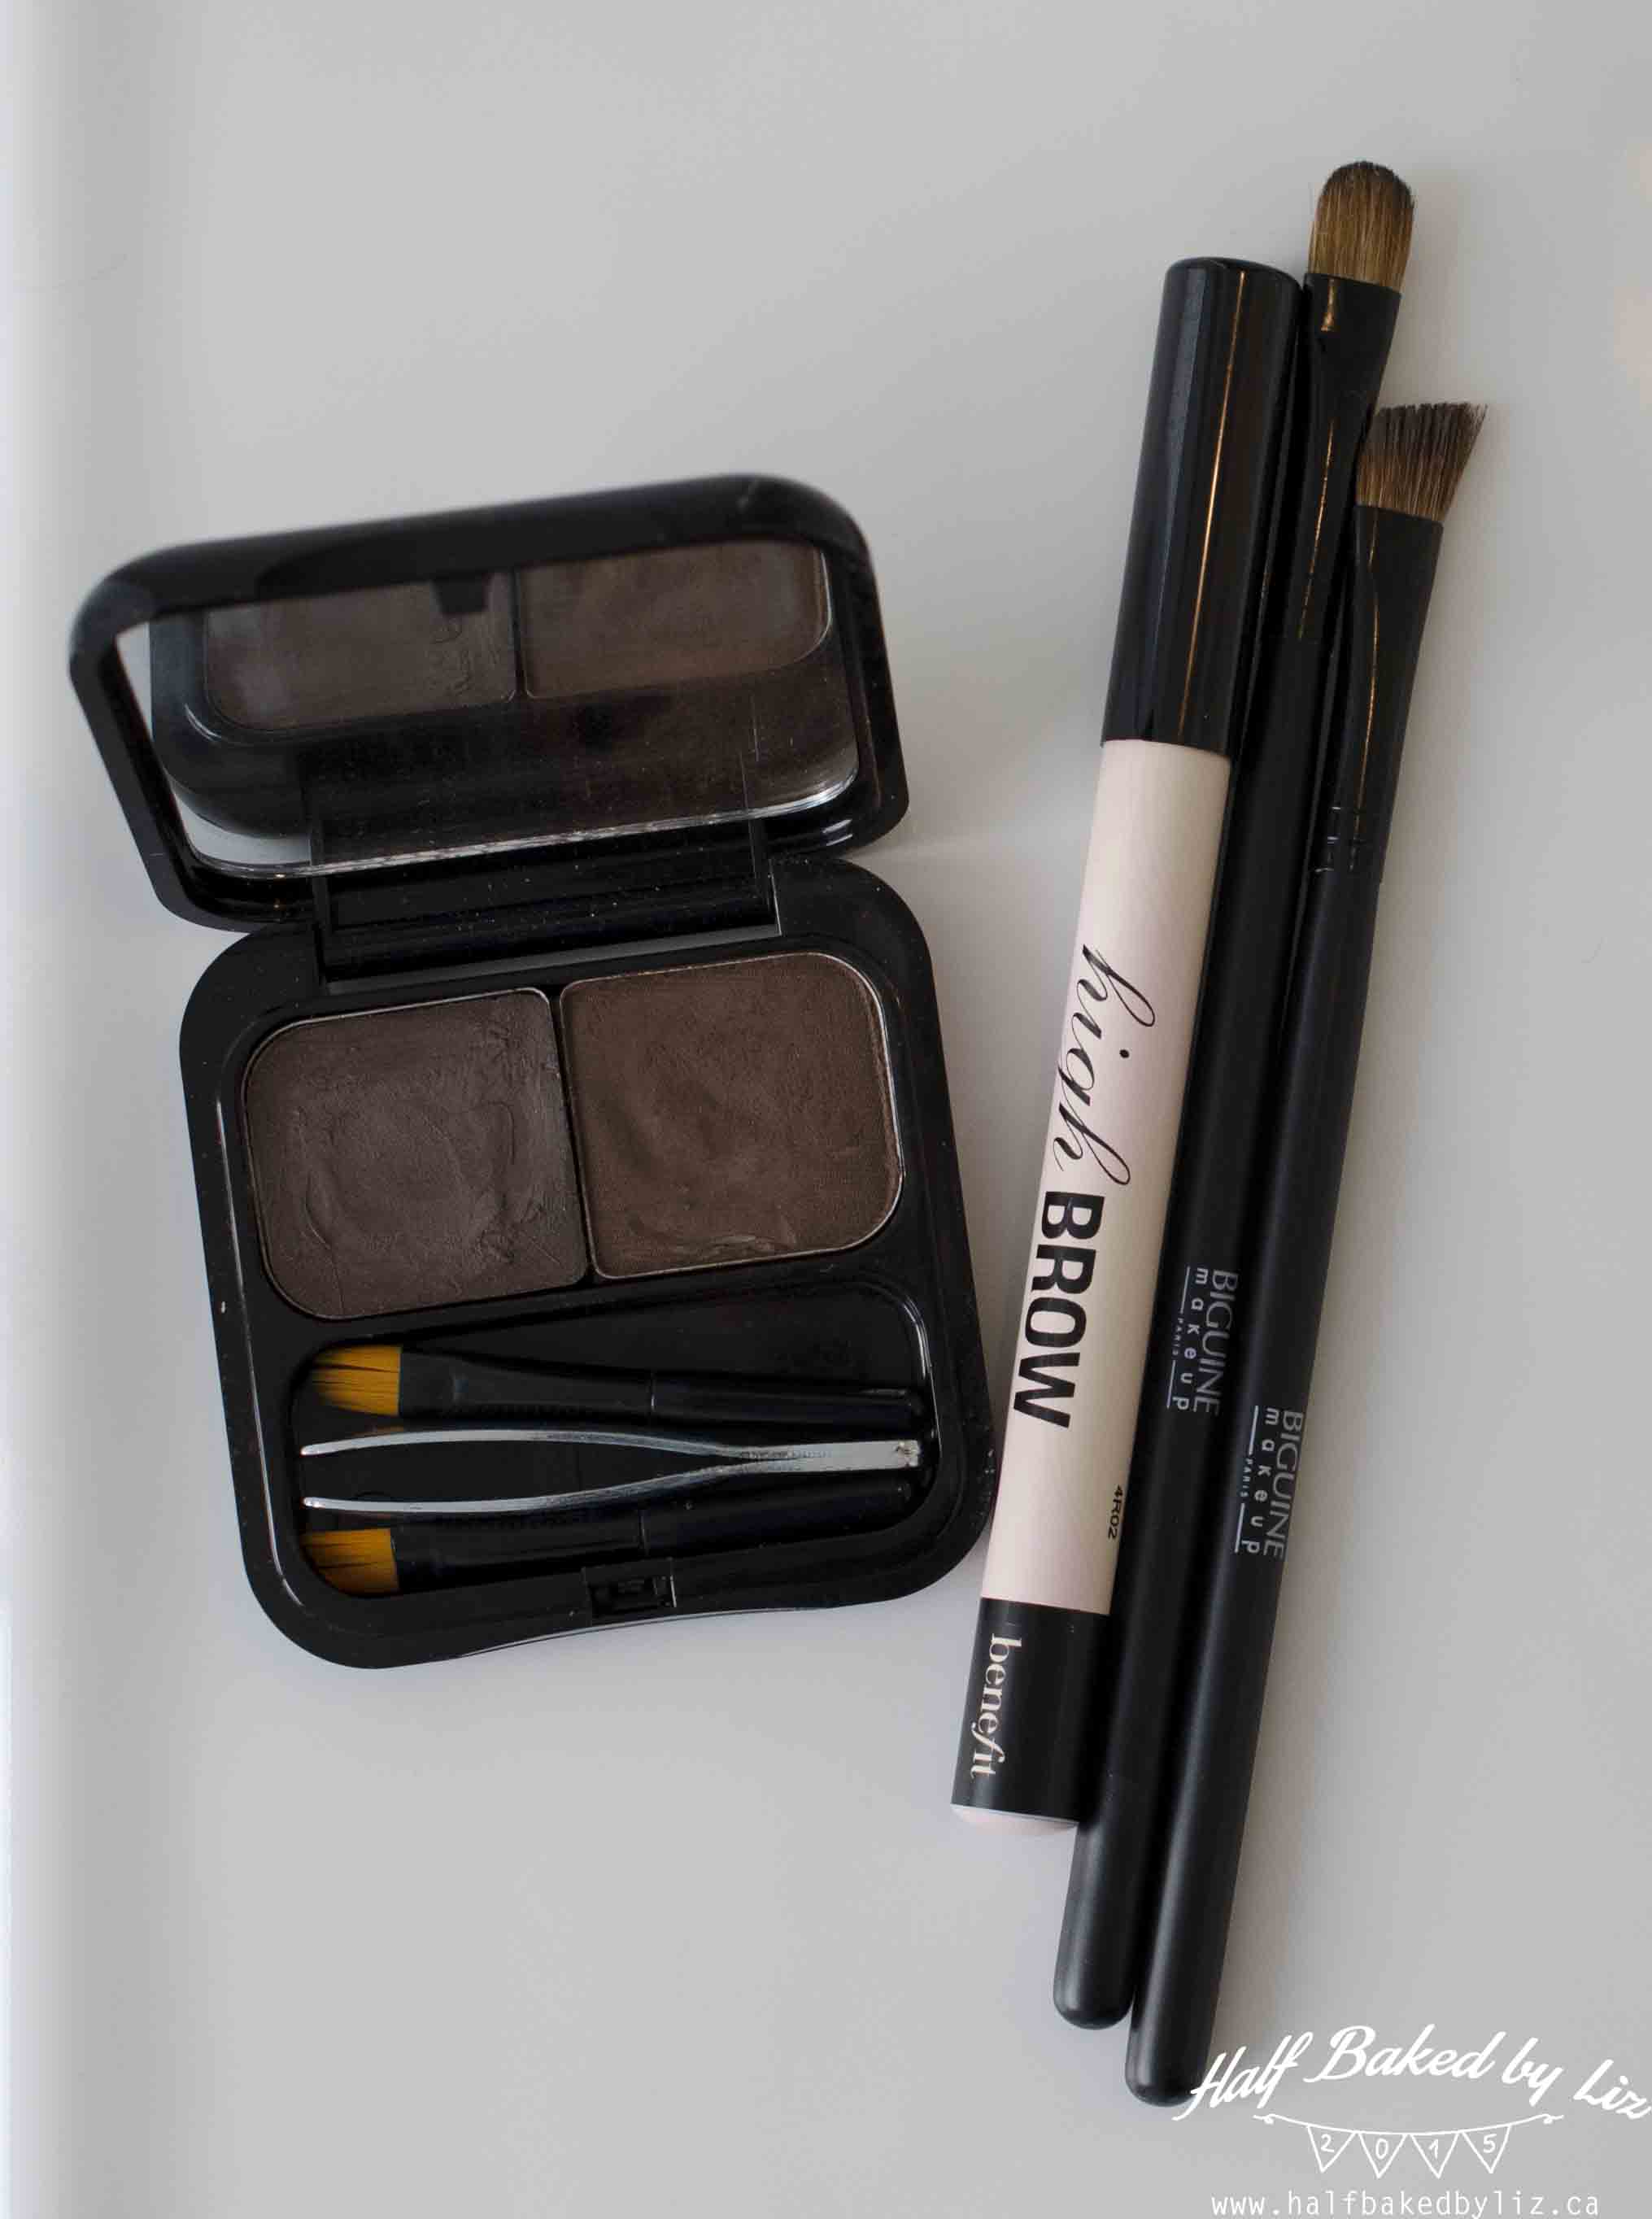 1 - Brow Products